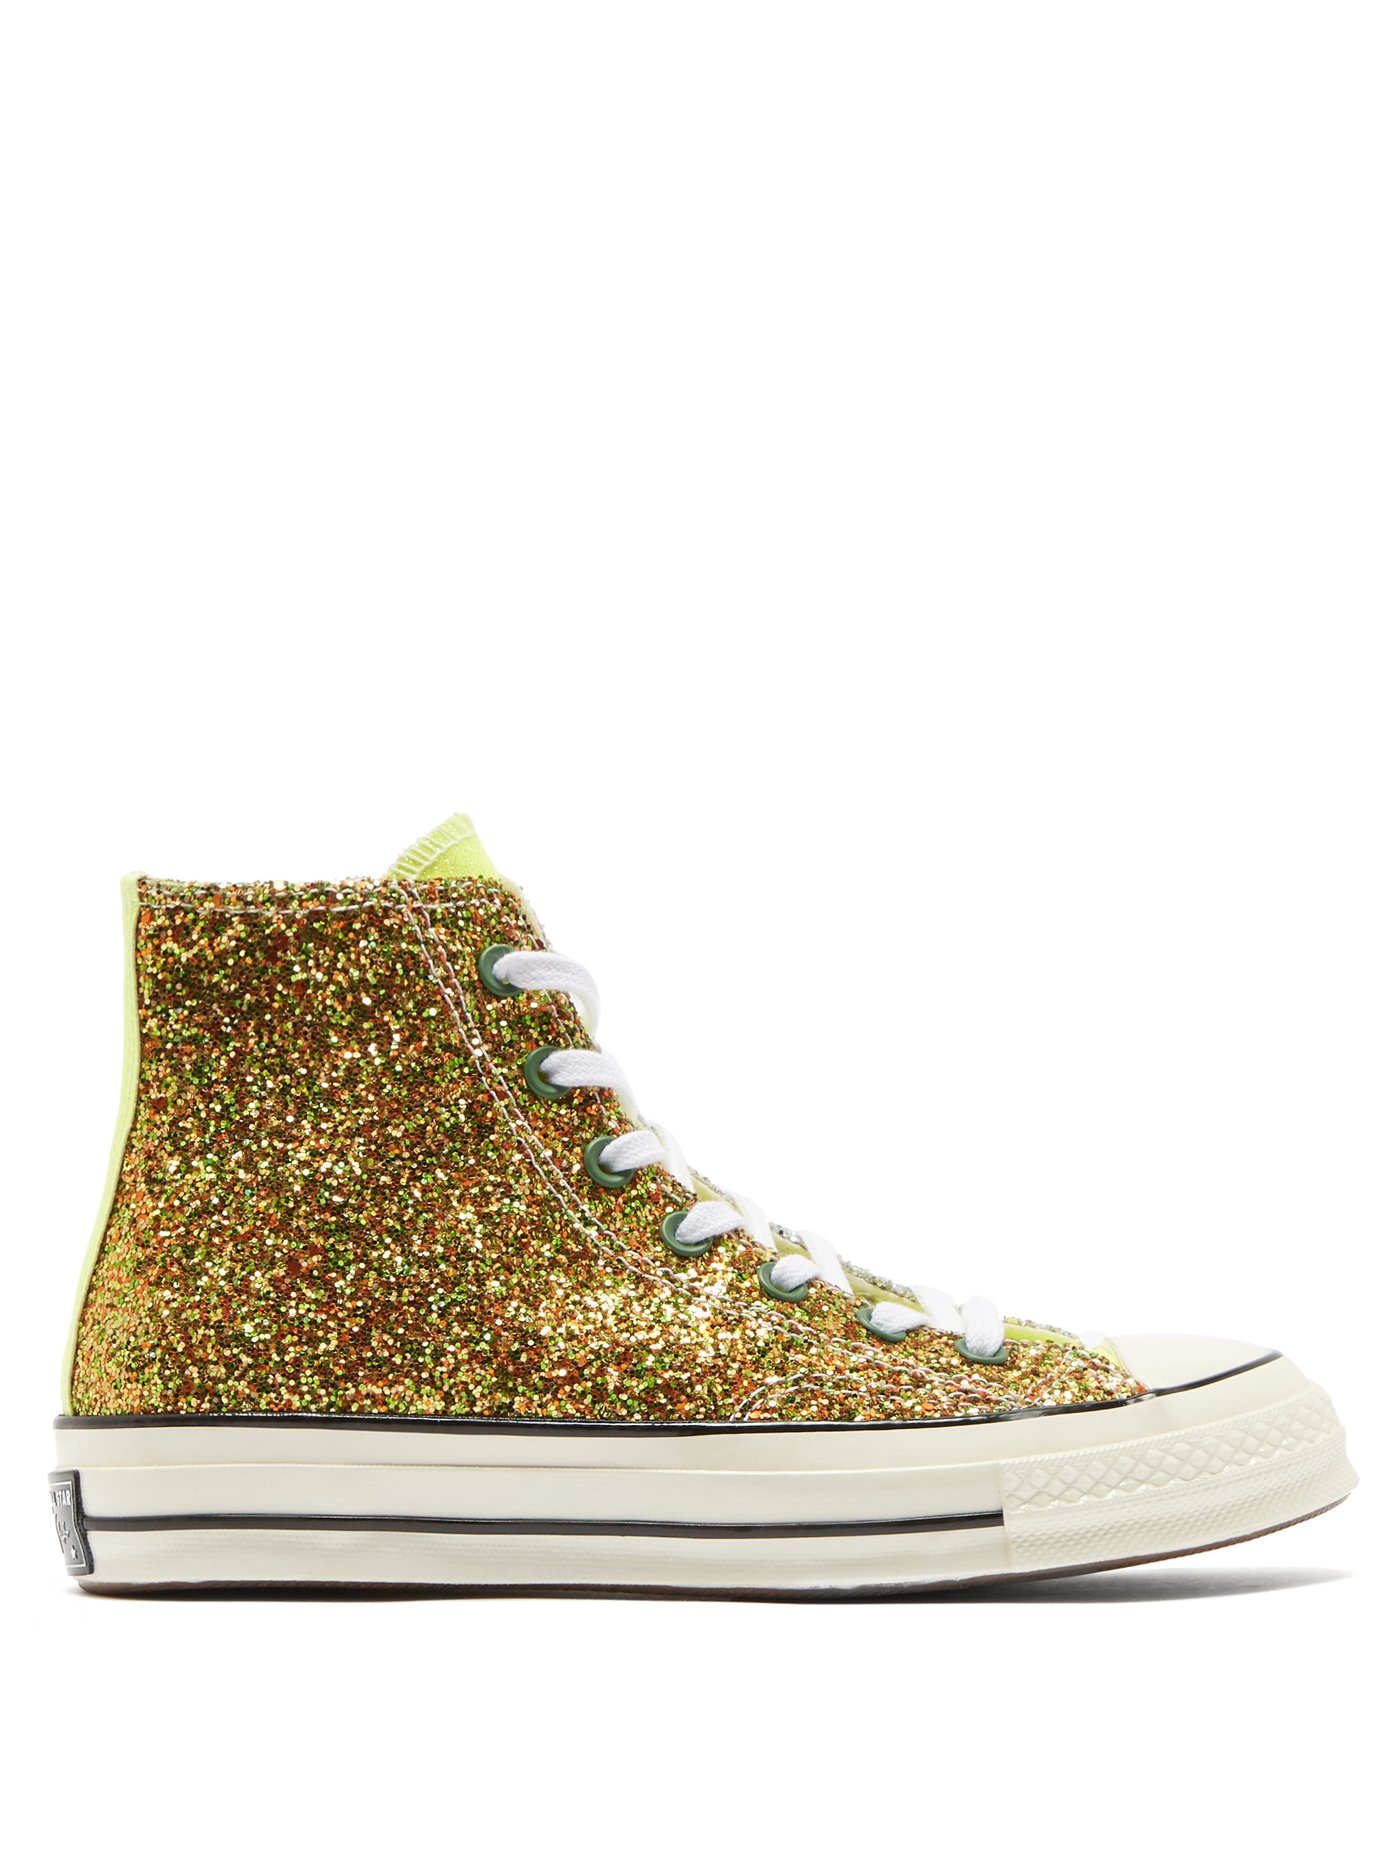 yellow sparkly converse